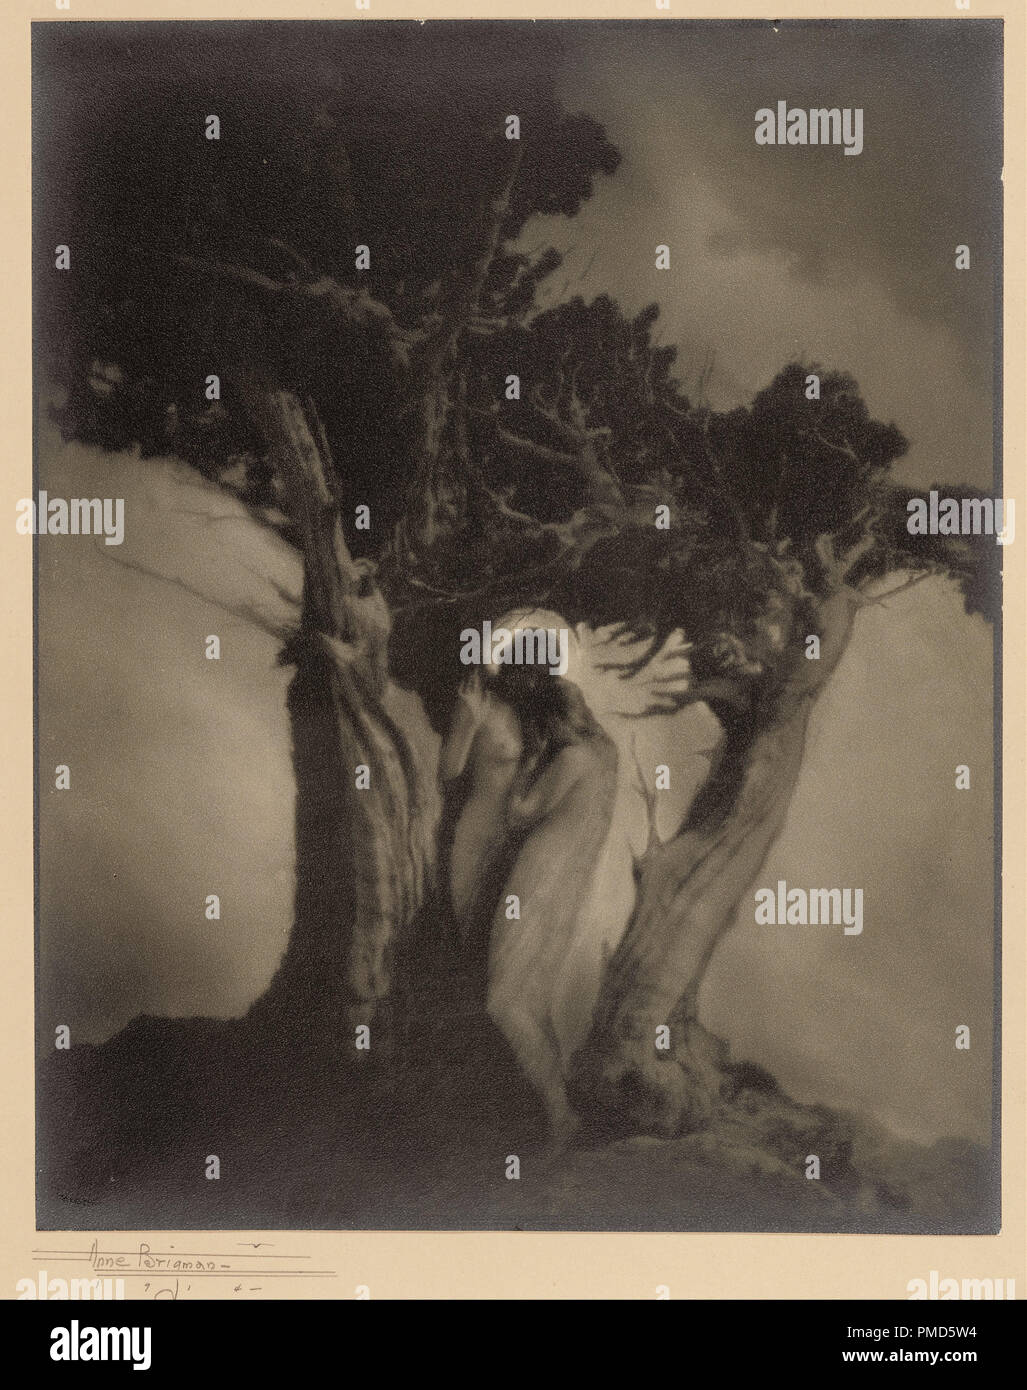 The Heart of the Storm. Date/Period: Negative 1902; print 1914. Print. Gelatin silver, toned or gelatin silver bromide. Height: 246 mm (9.68 in); Width: 197 mm (7.75 in). Author: Anne W. Brigman. Stock Photo